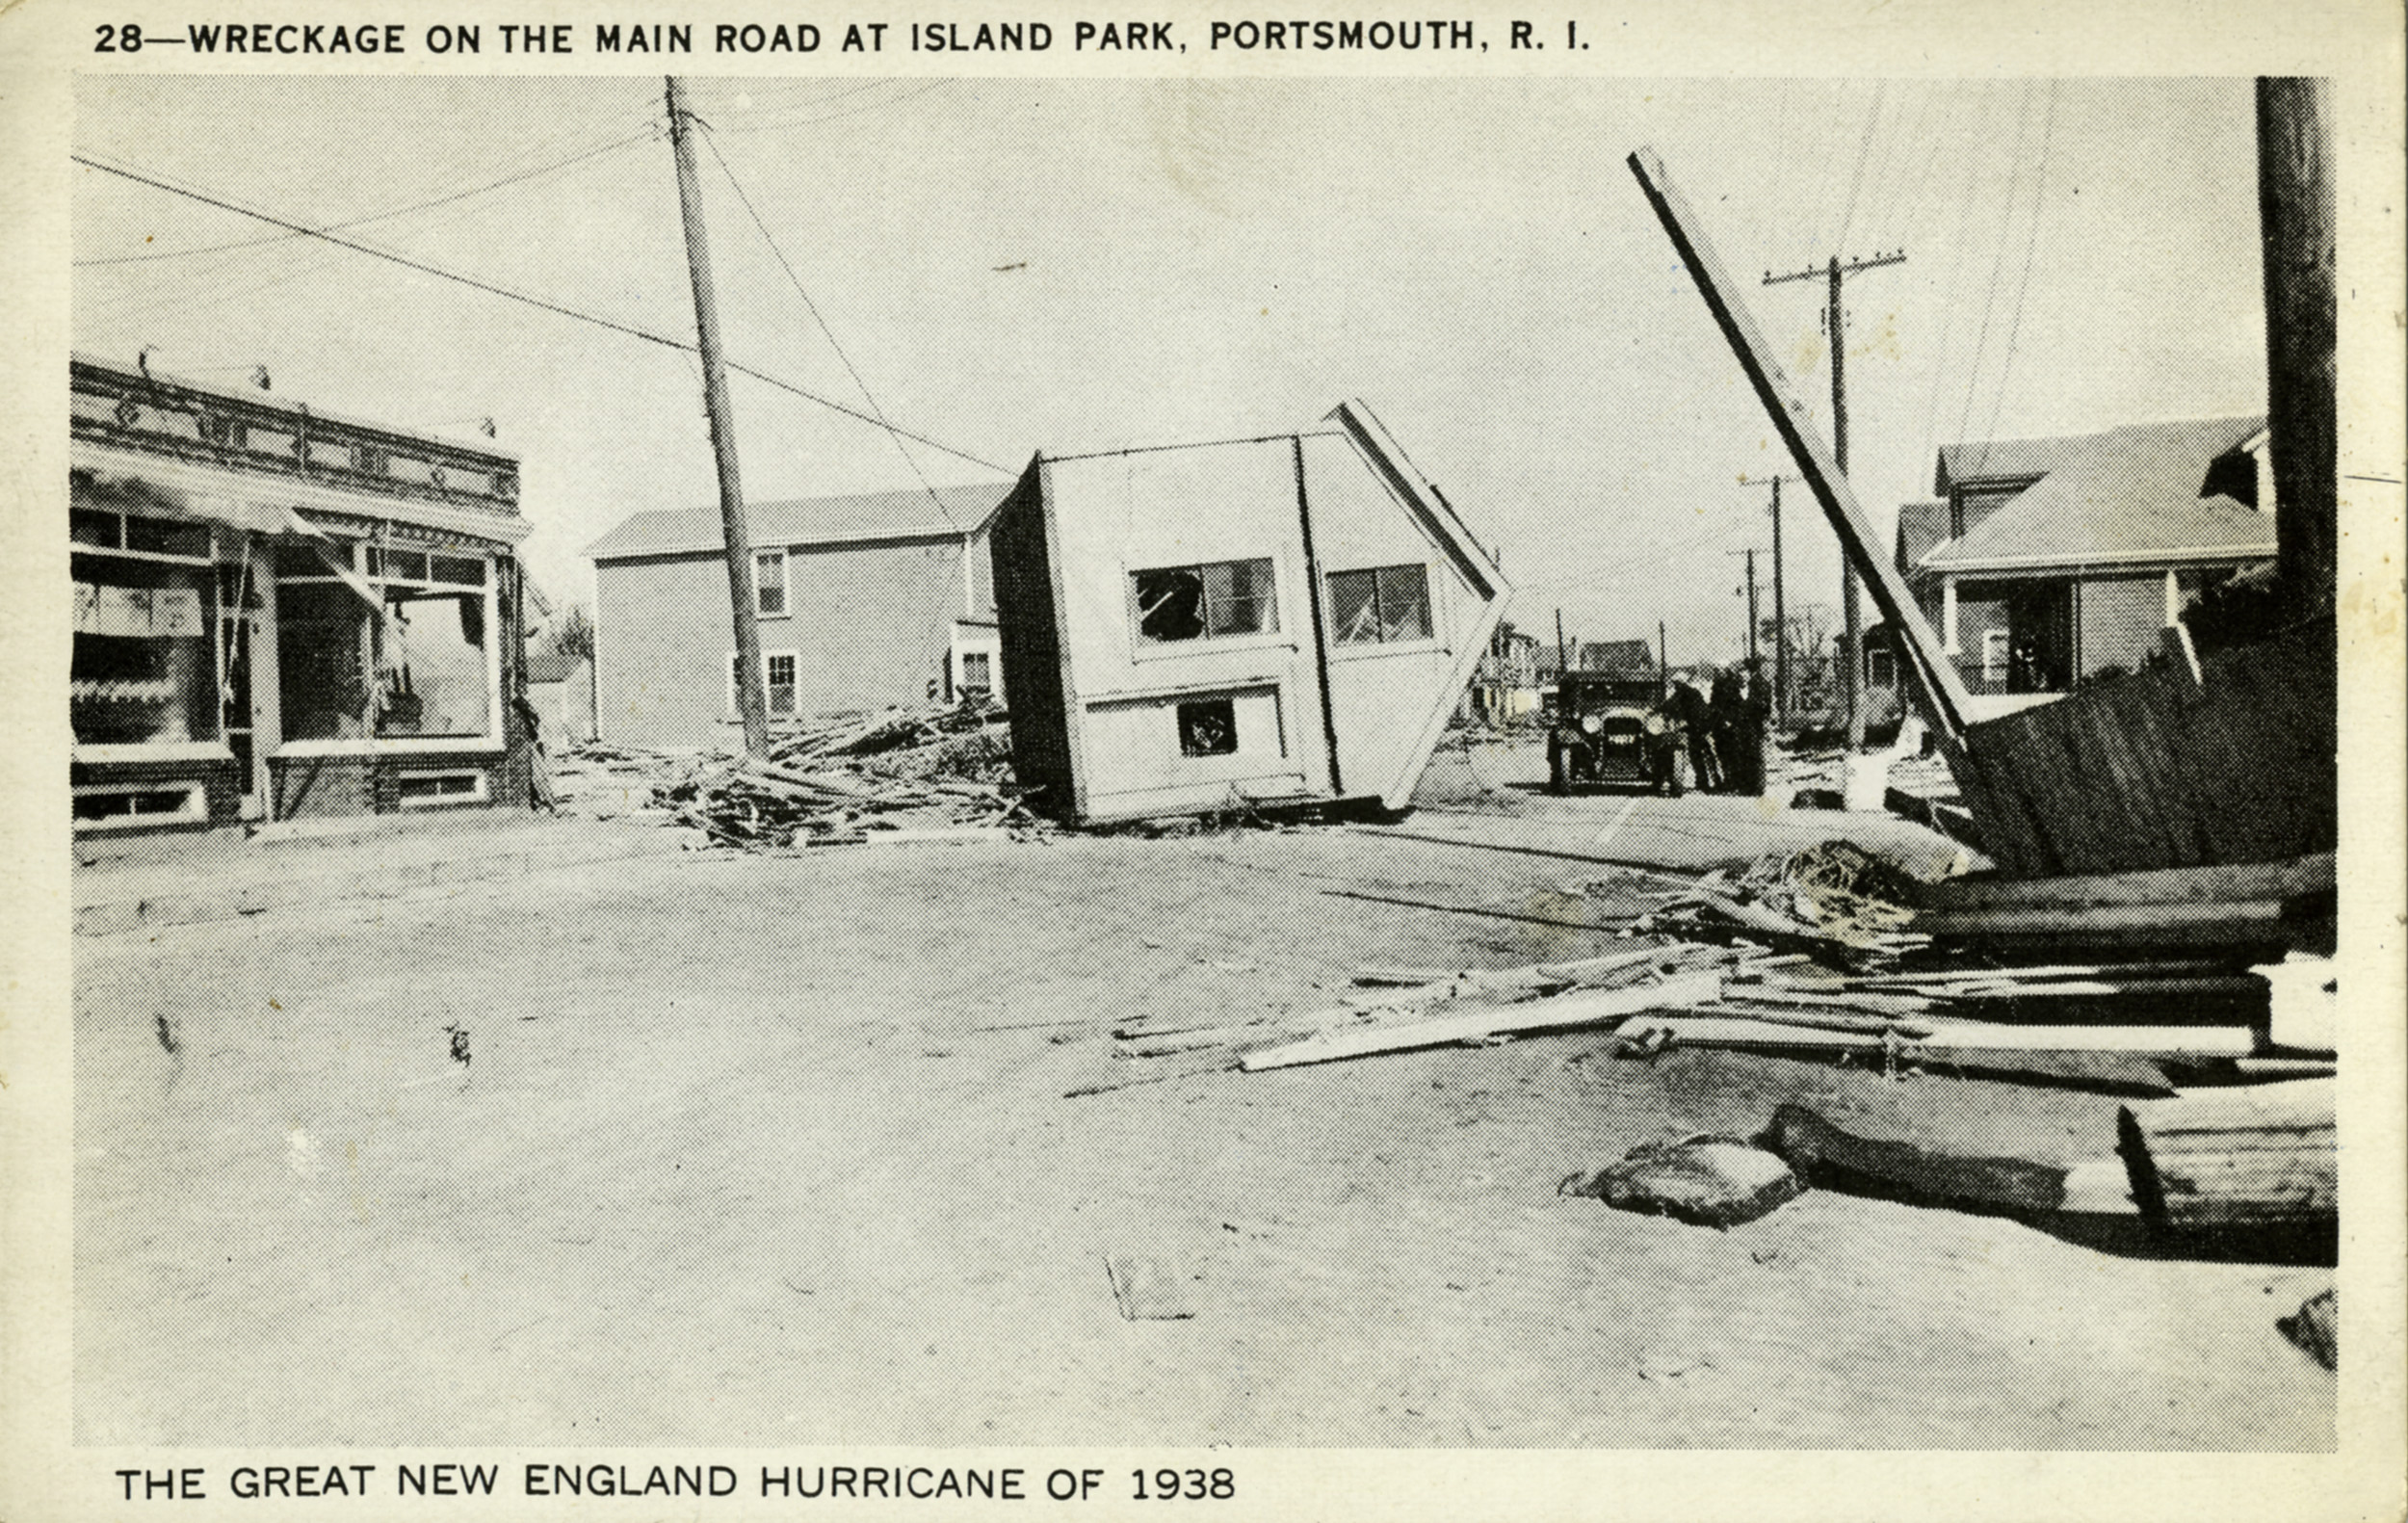 The devastating hurricane of 1938 blew this house into the middle of Park Avenue.